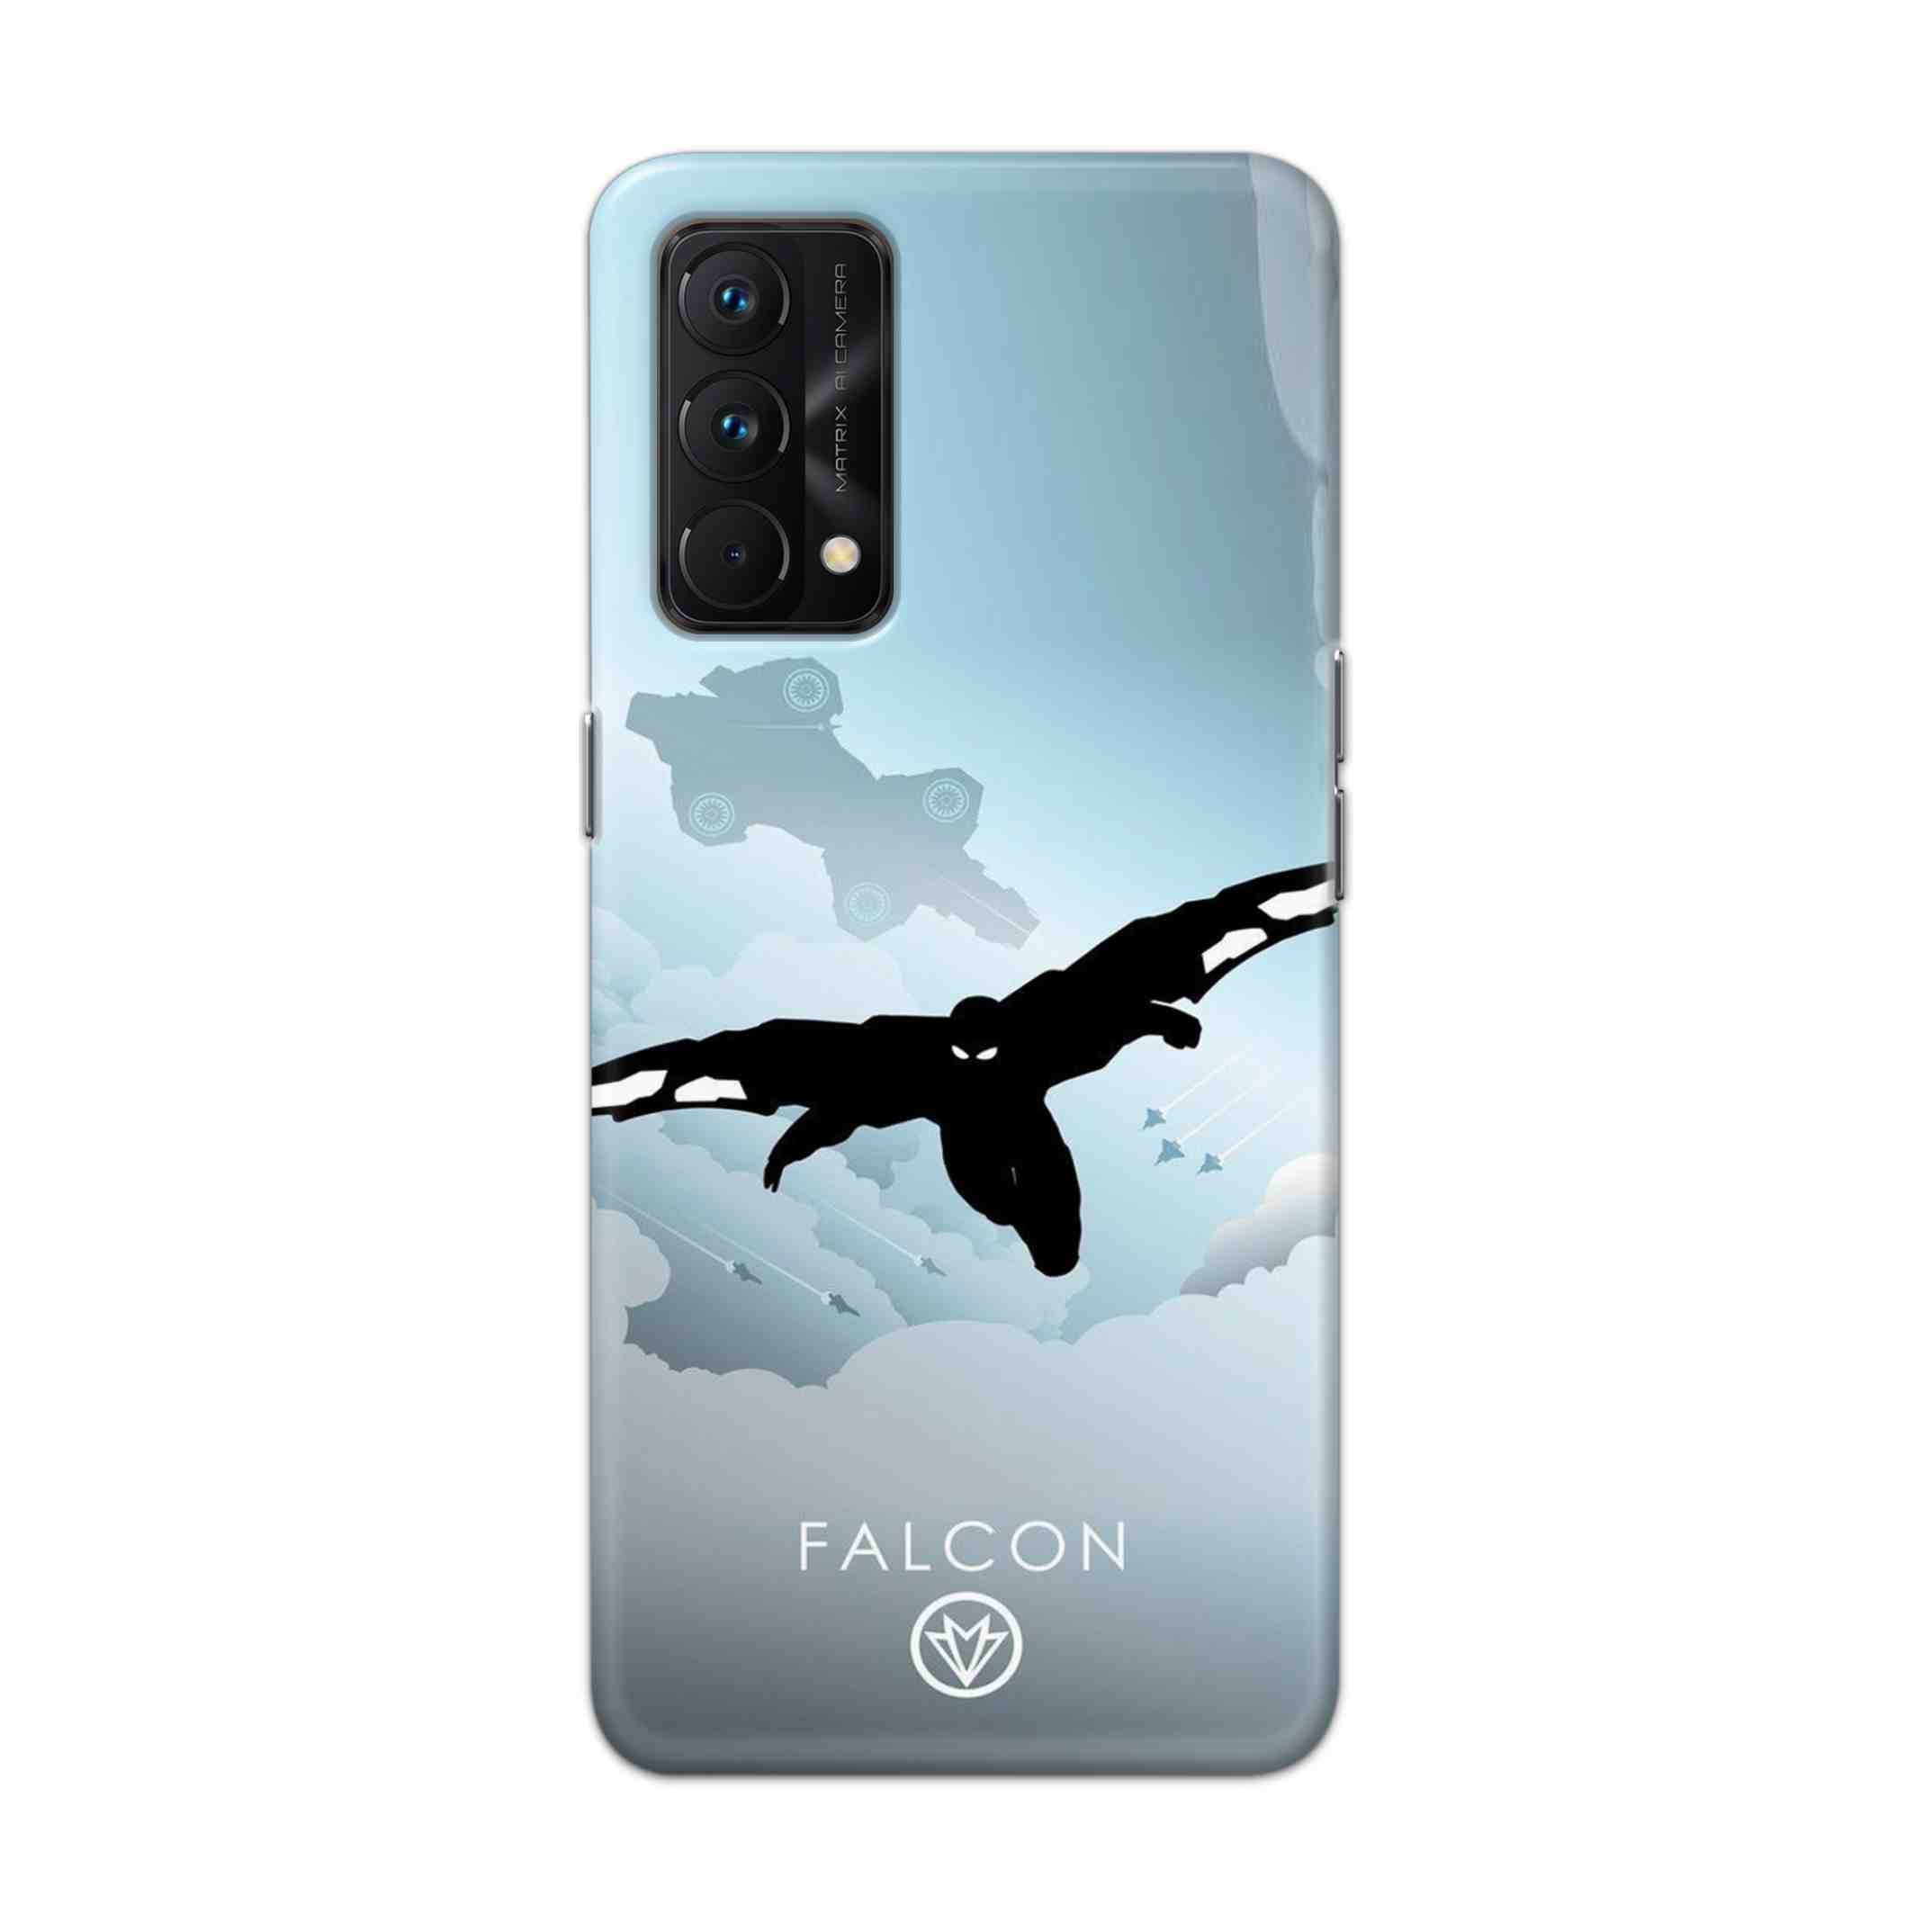 Buy Falcon Hard Back Mobile Phone Case Cover For Realme GT Master Online